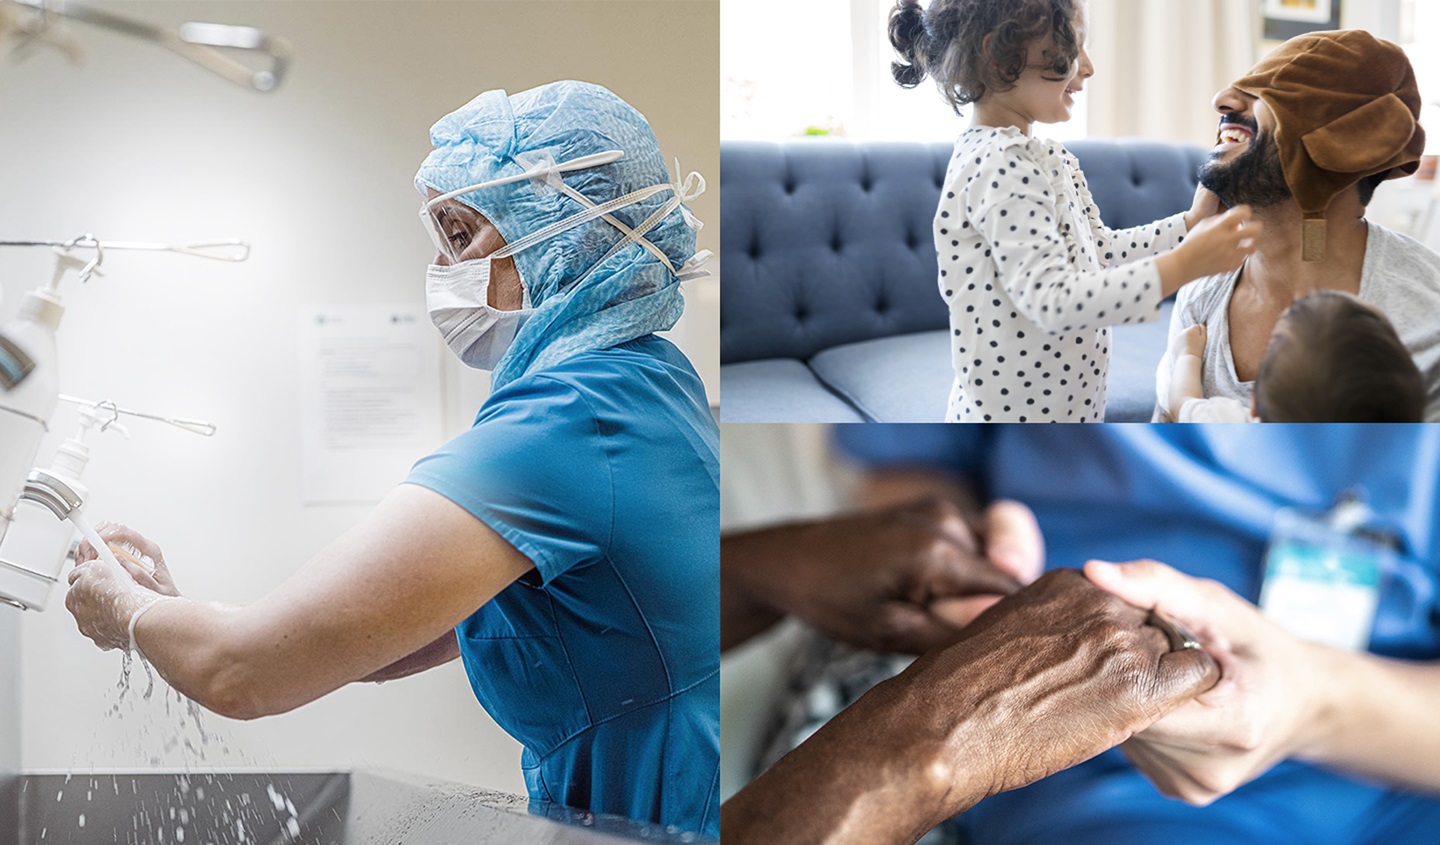 A collage of three images that illustrate the HARTMANN visual language. The collage shows a doctor washing her hands, a father playing with his children and a nurse holding a patient's hands.